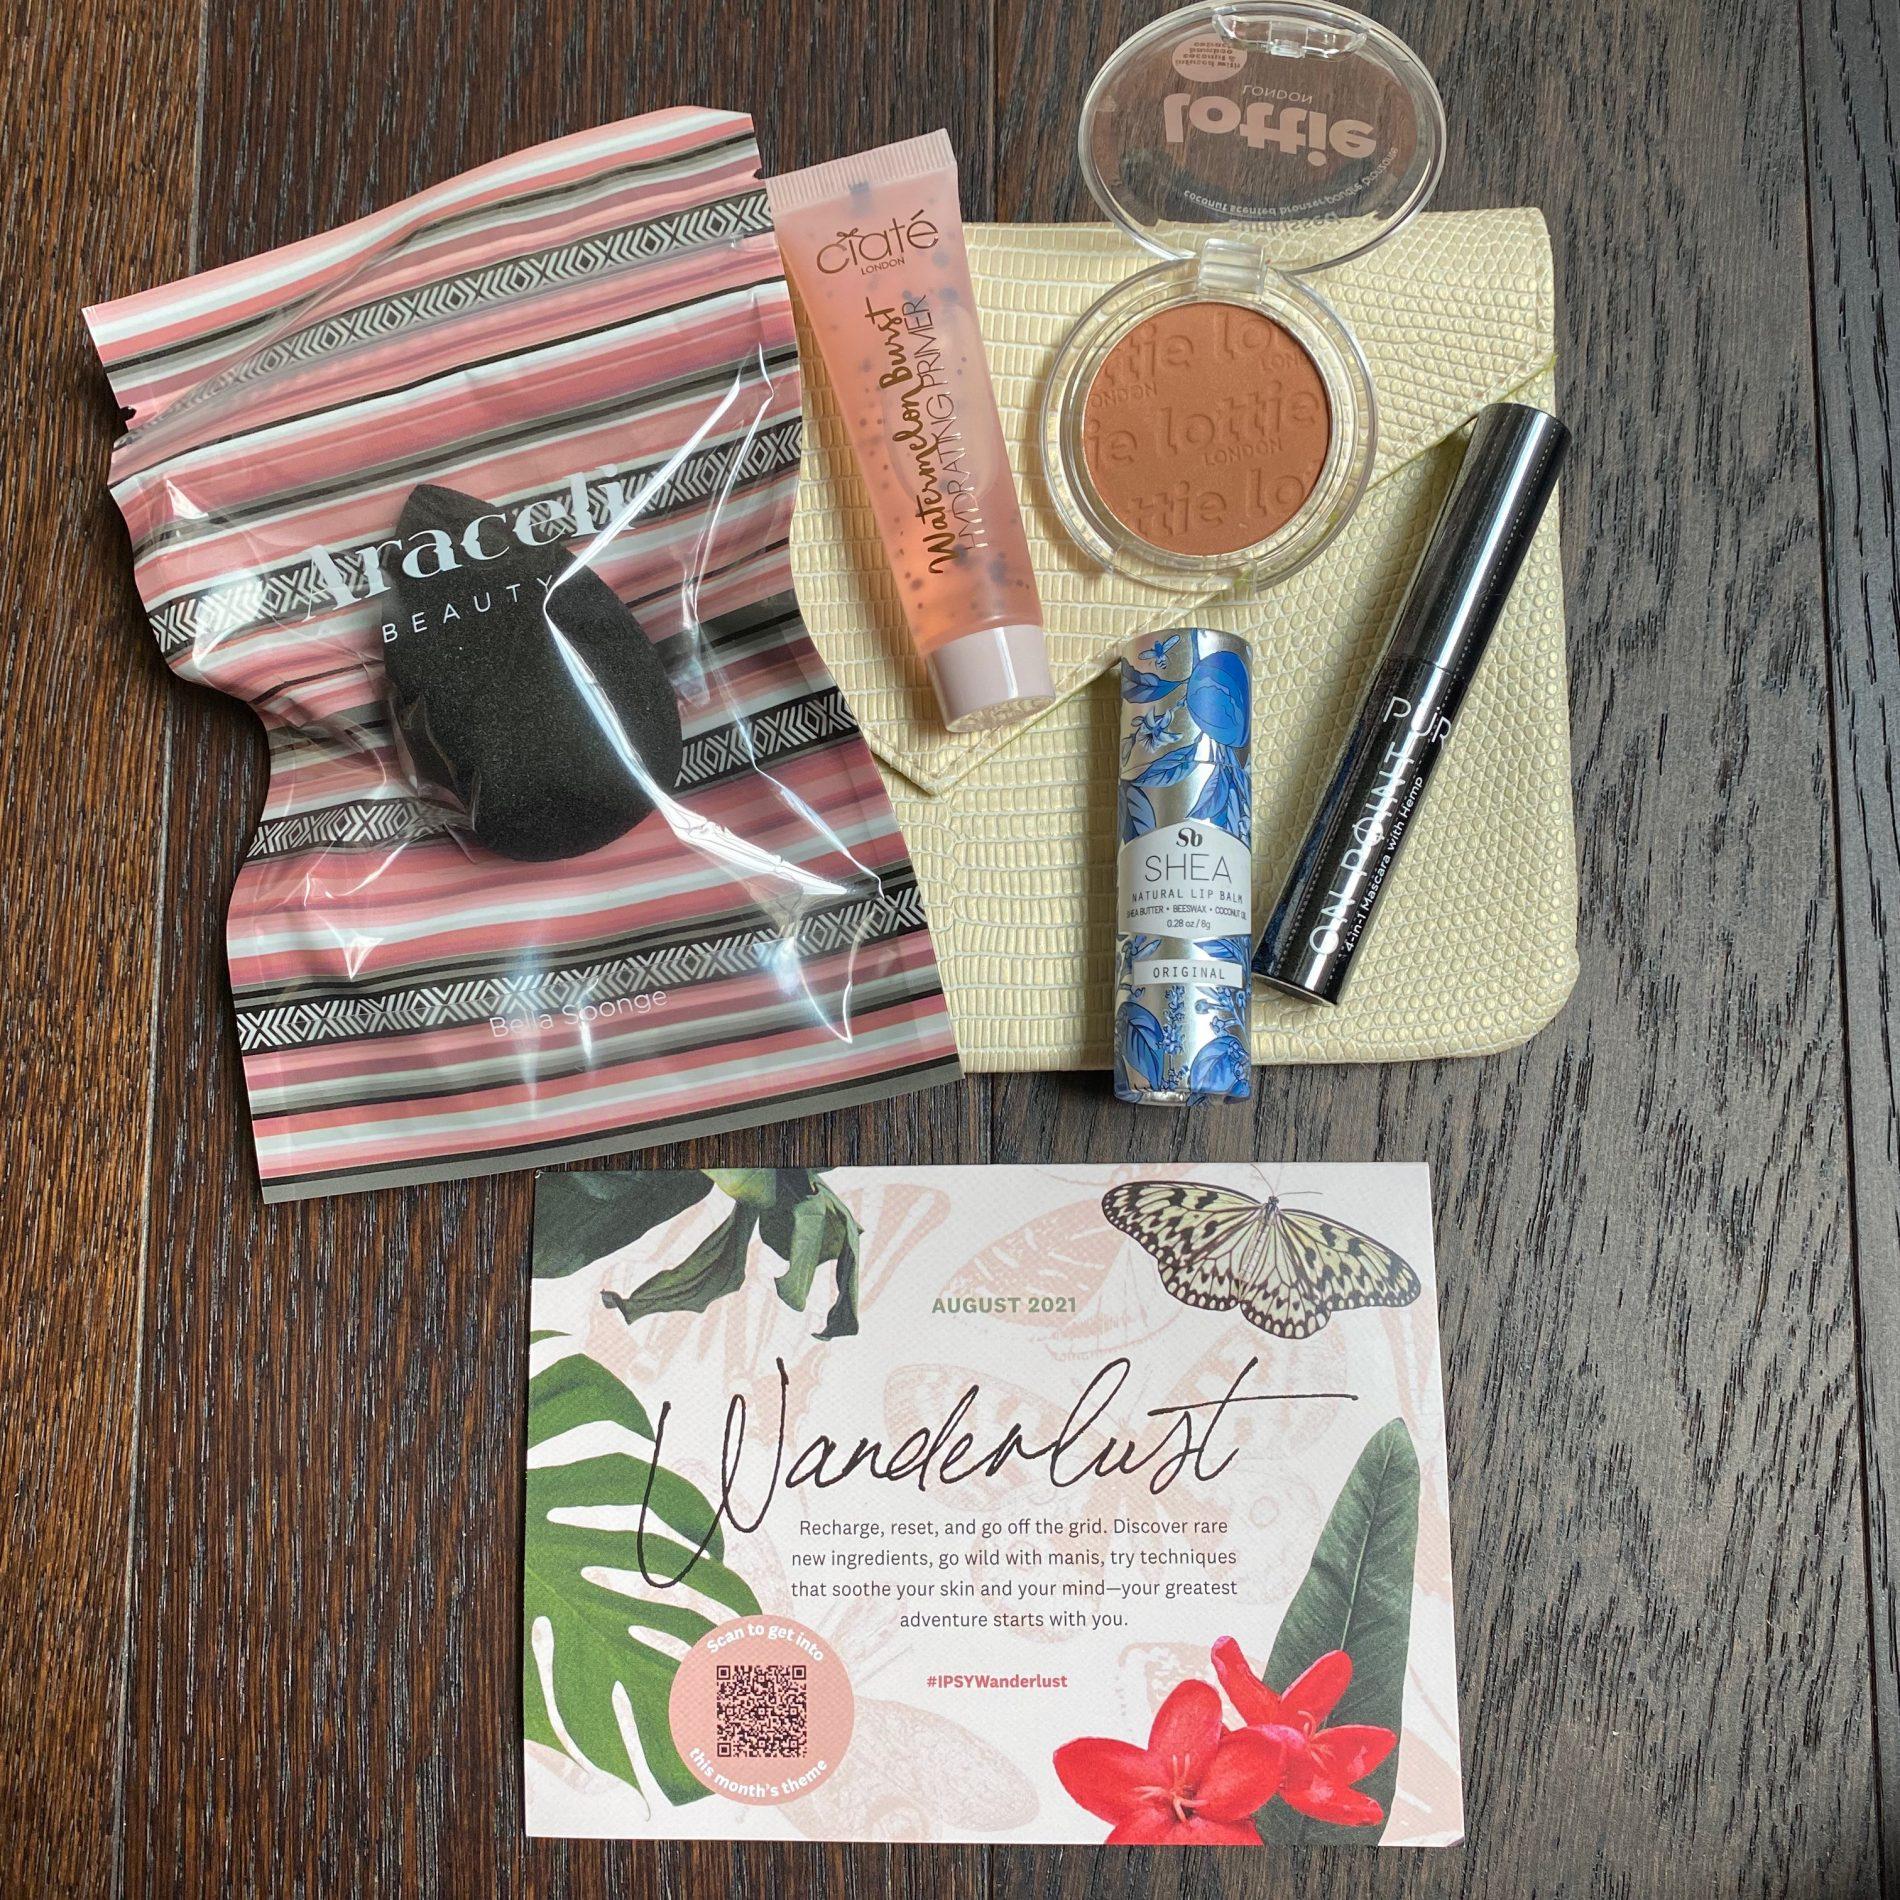 ipsy Review – August 2021